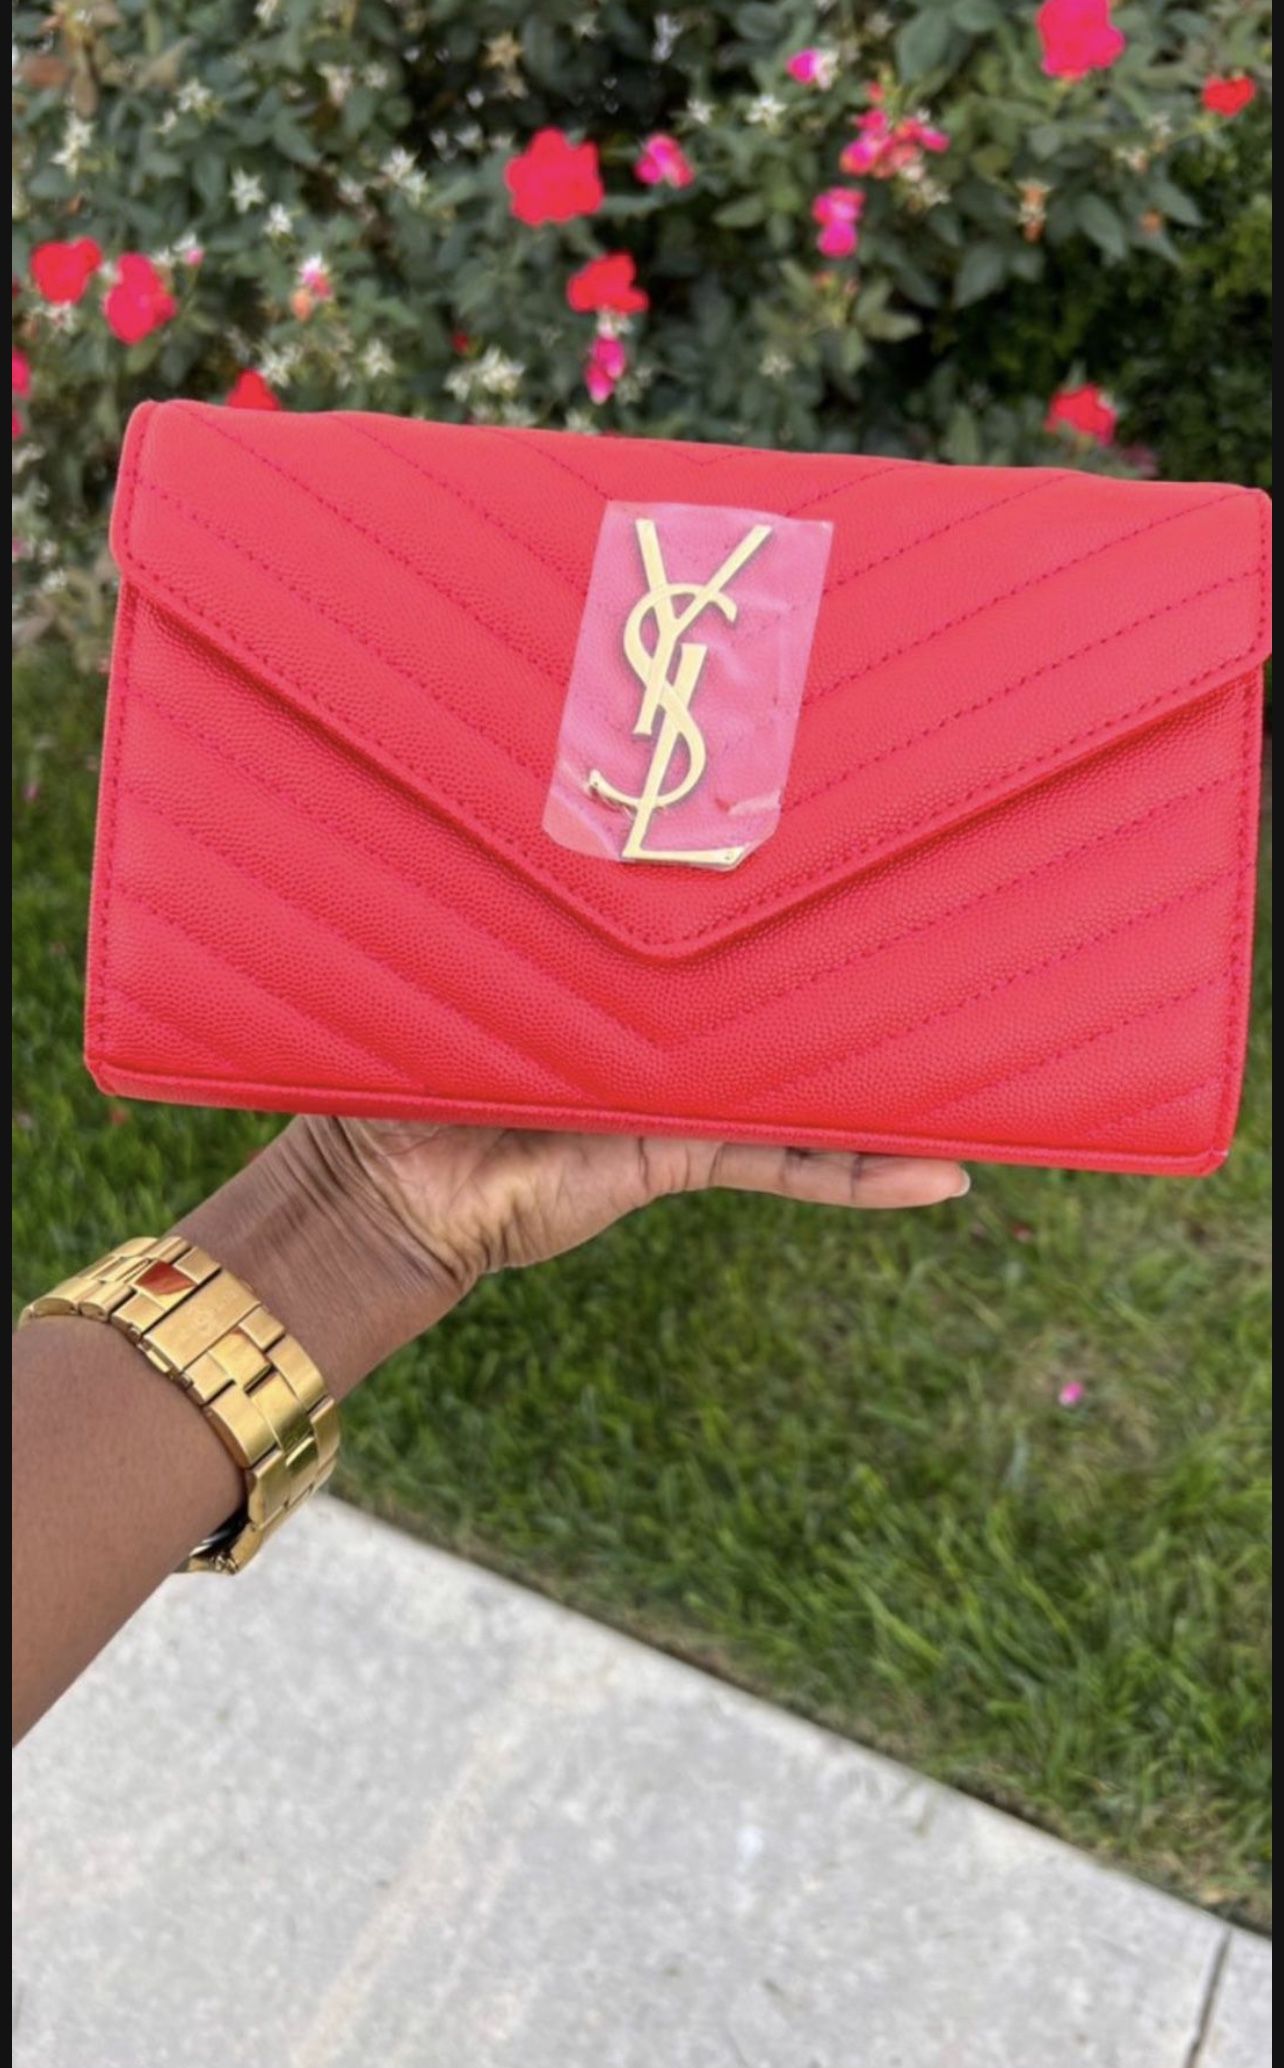 YSL Purse- Open To Negotiate - Need gone 